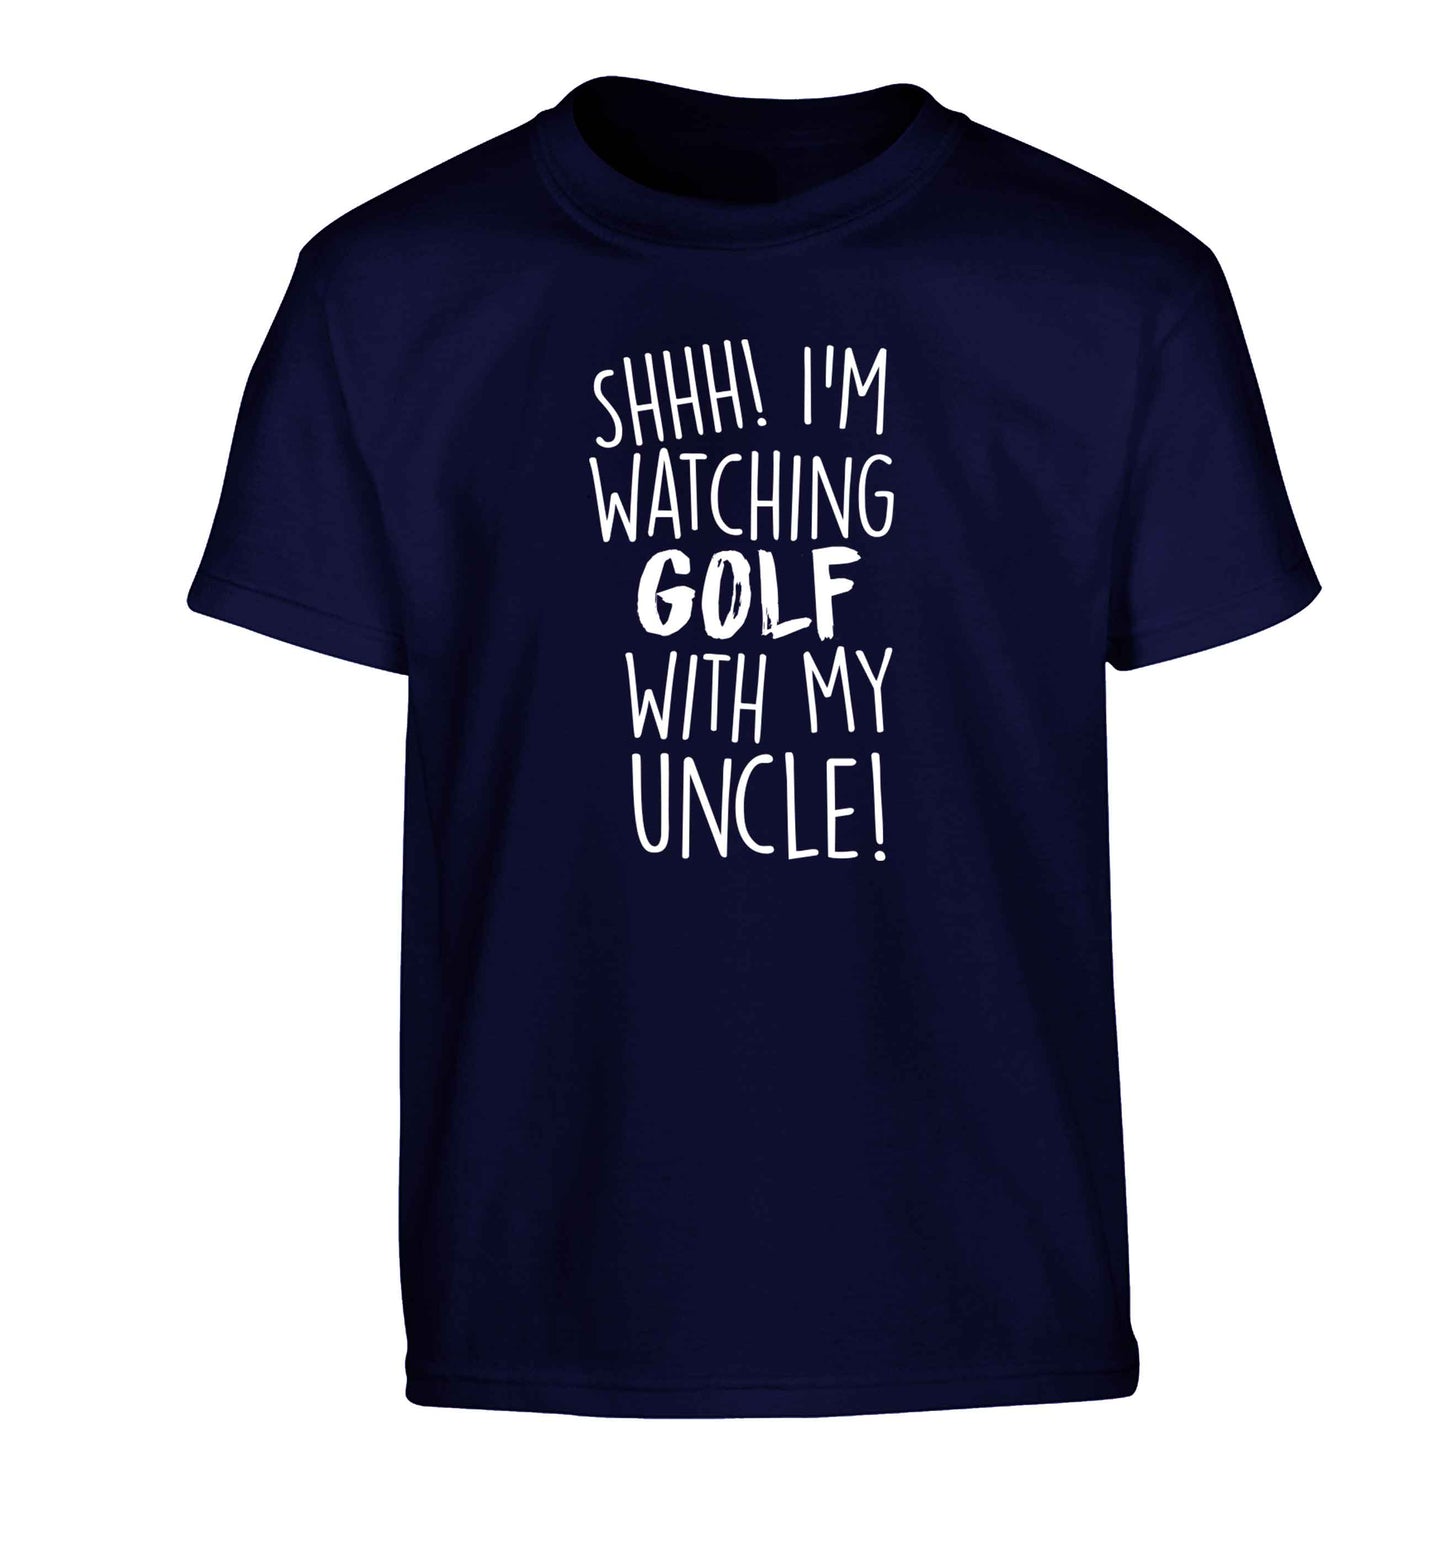 Shh I'm watching golf with my uncle Children's navy Tshirt 12-13 Years